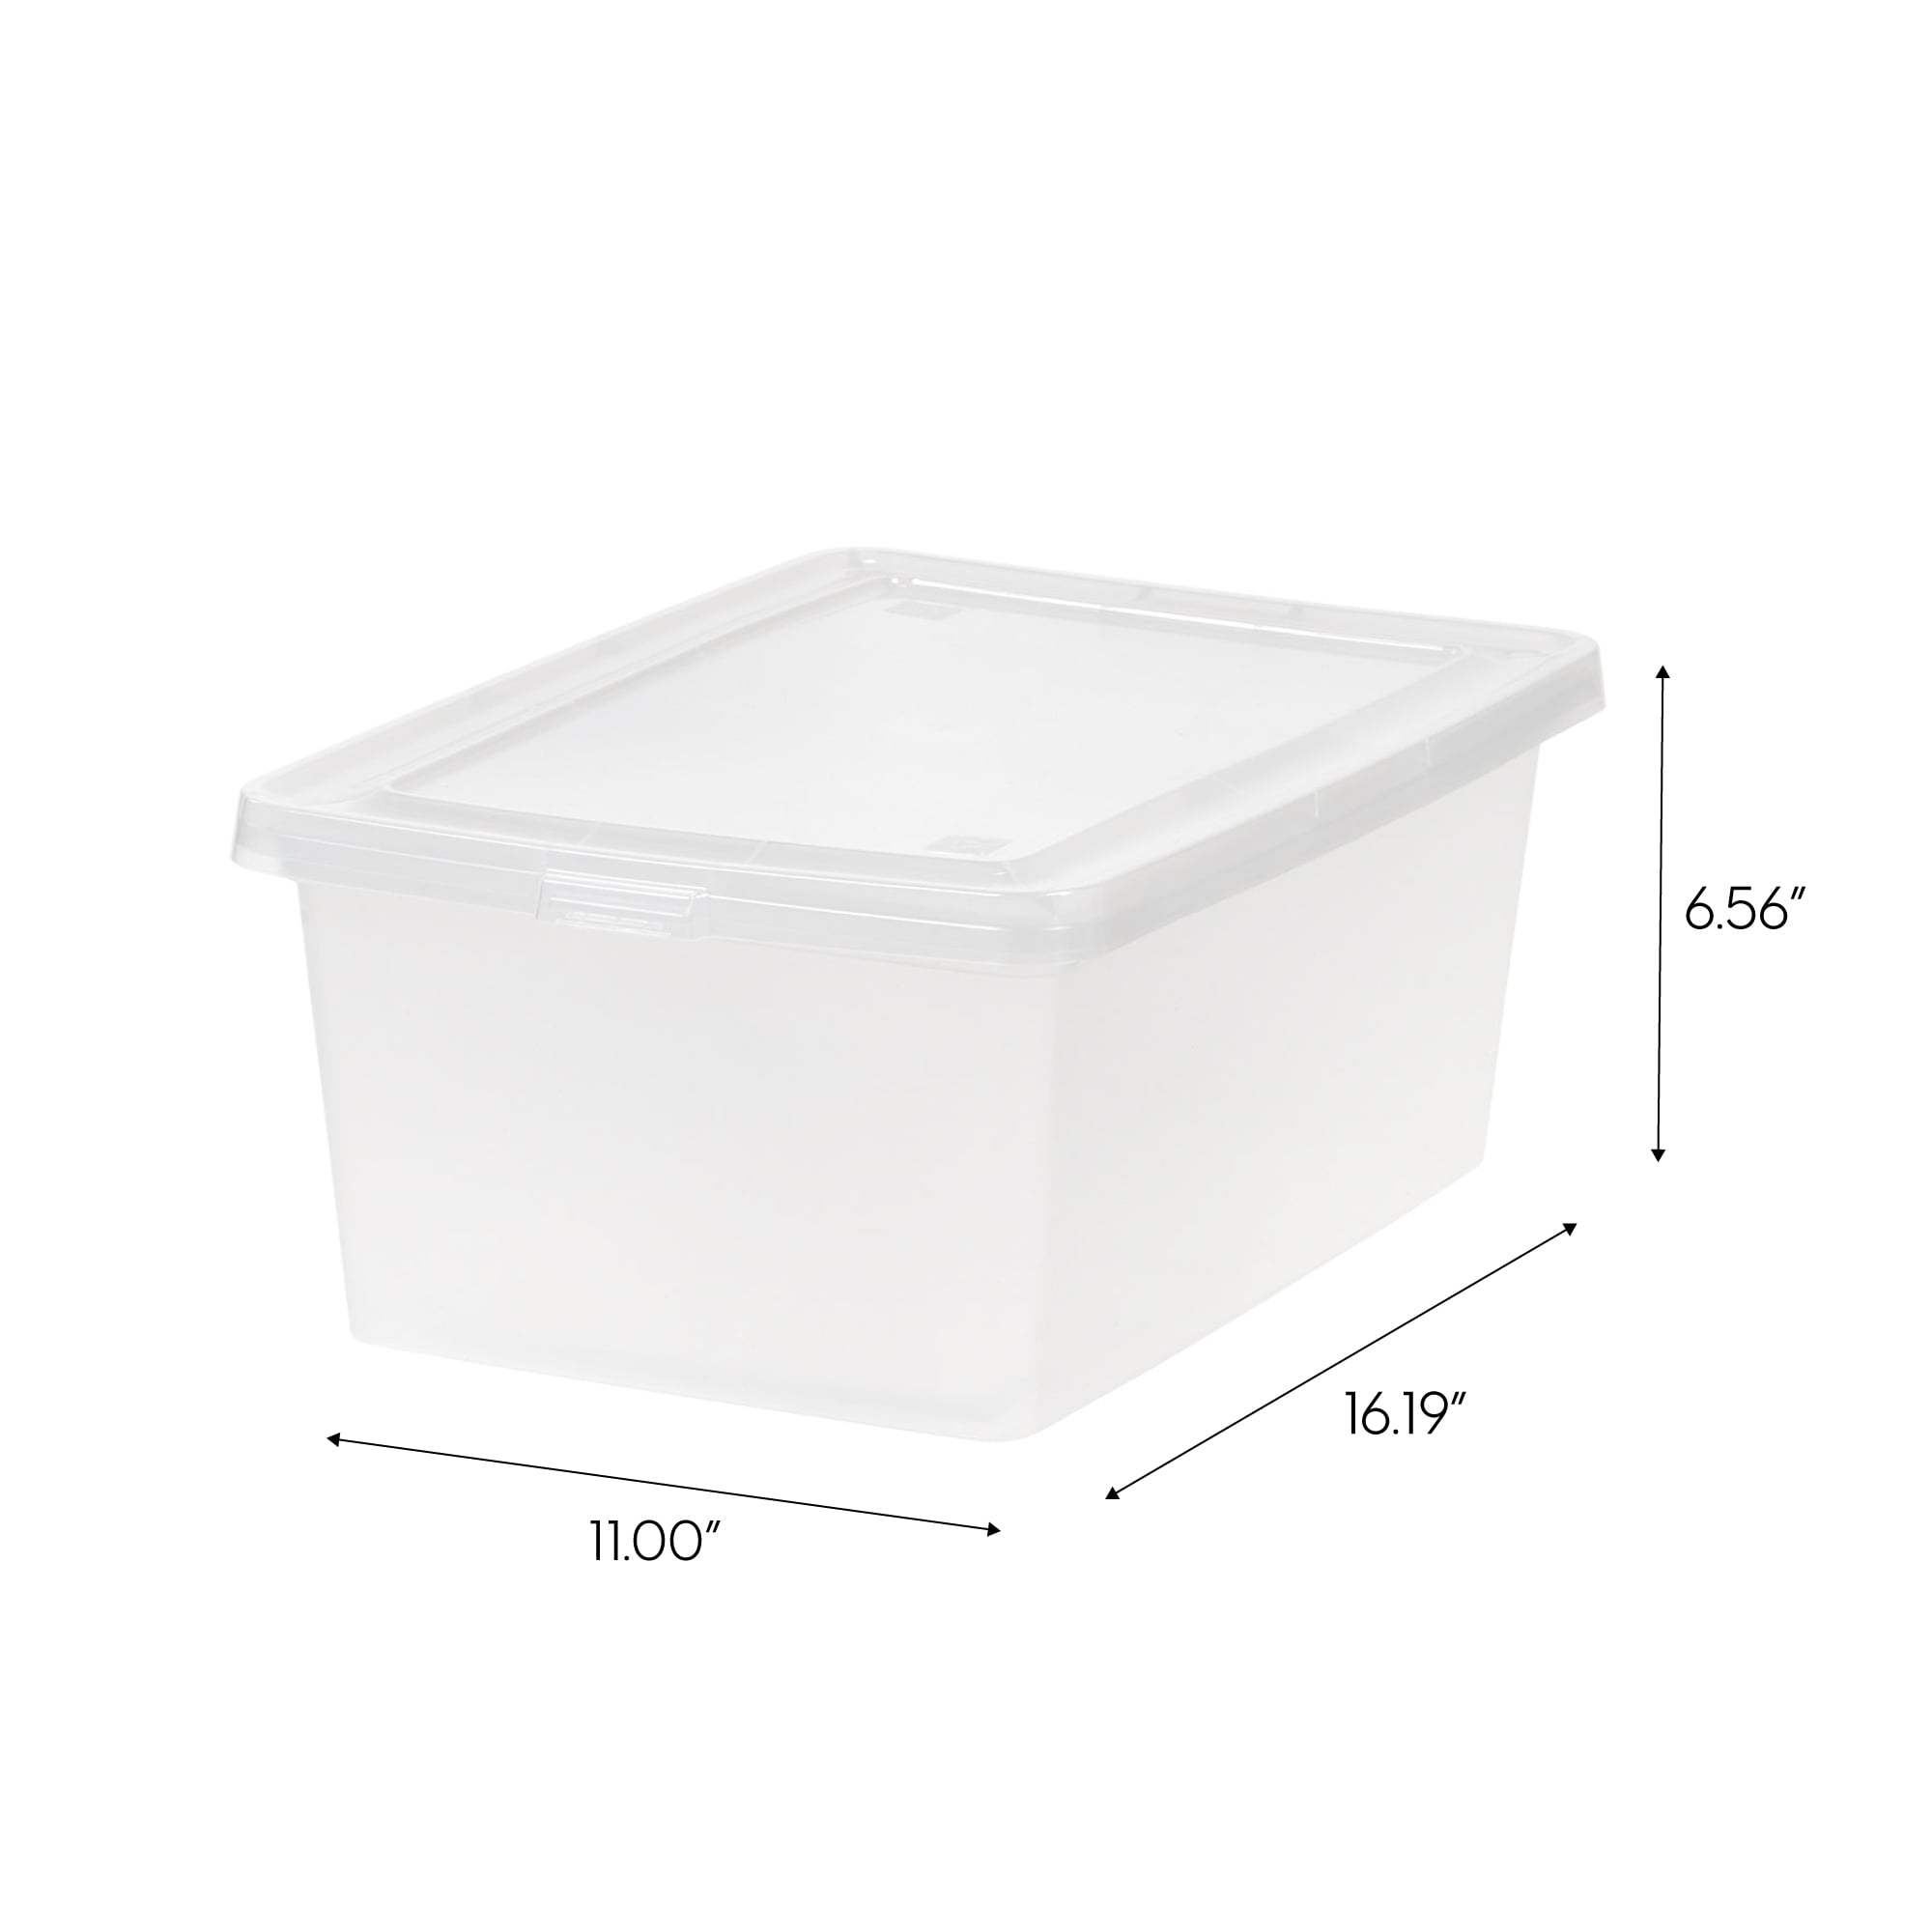 Bienvoun Plastic Storage Bins with Lids,Clear Storage Containers for  Organizing,Large Stackable Storage Box 17QT 4 Packs